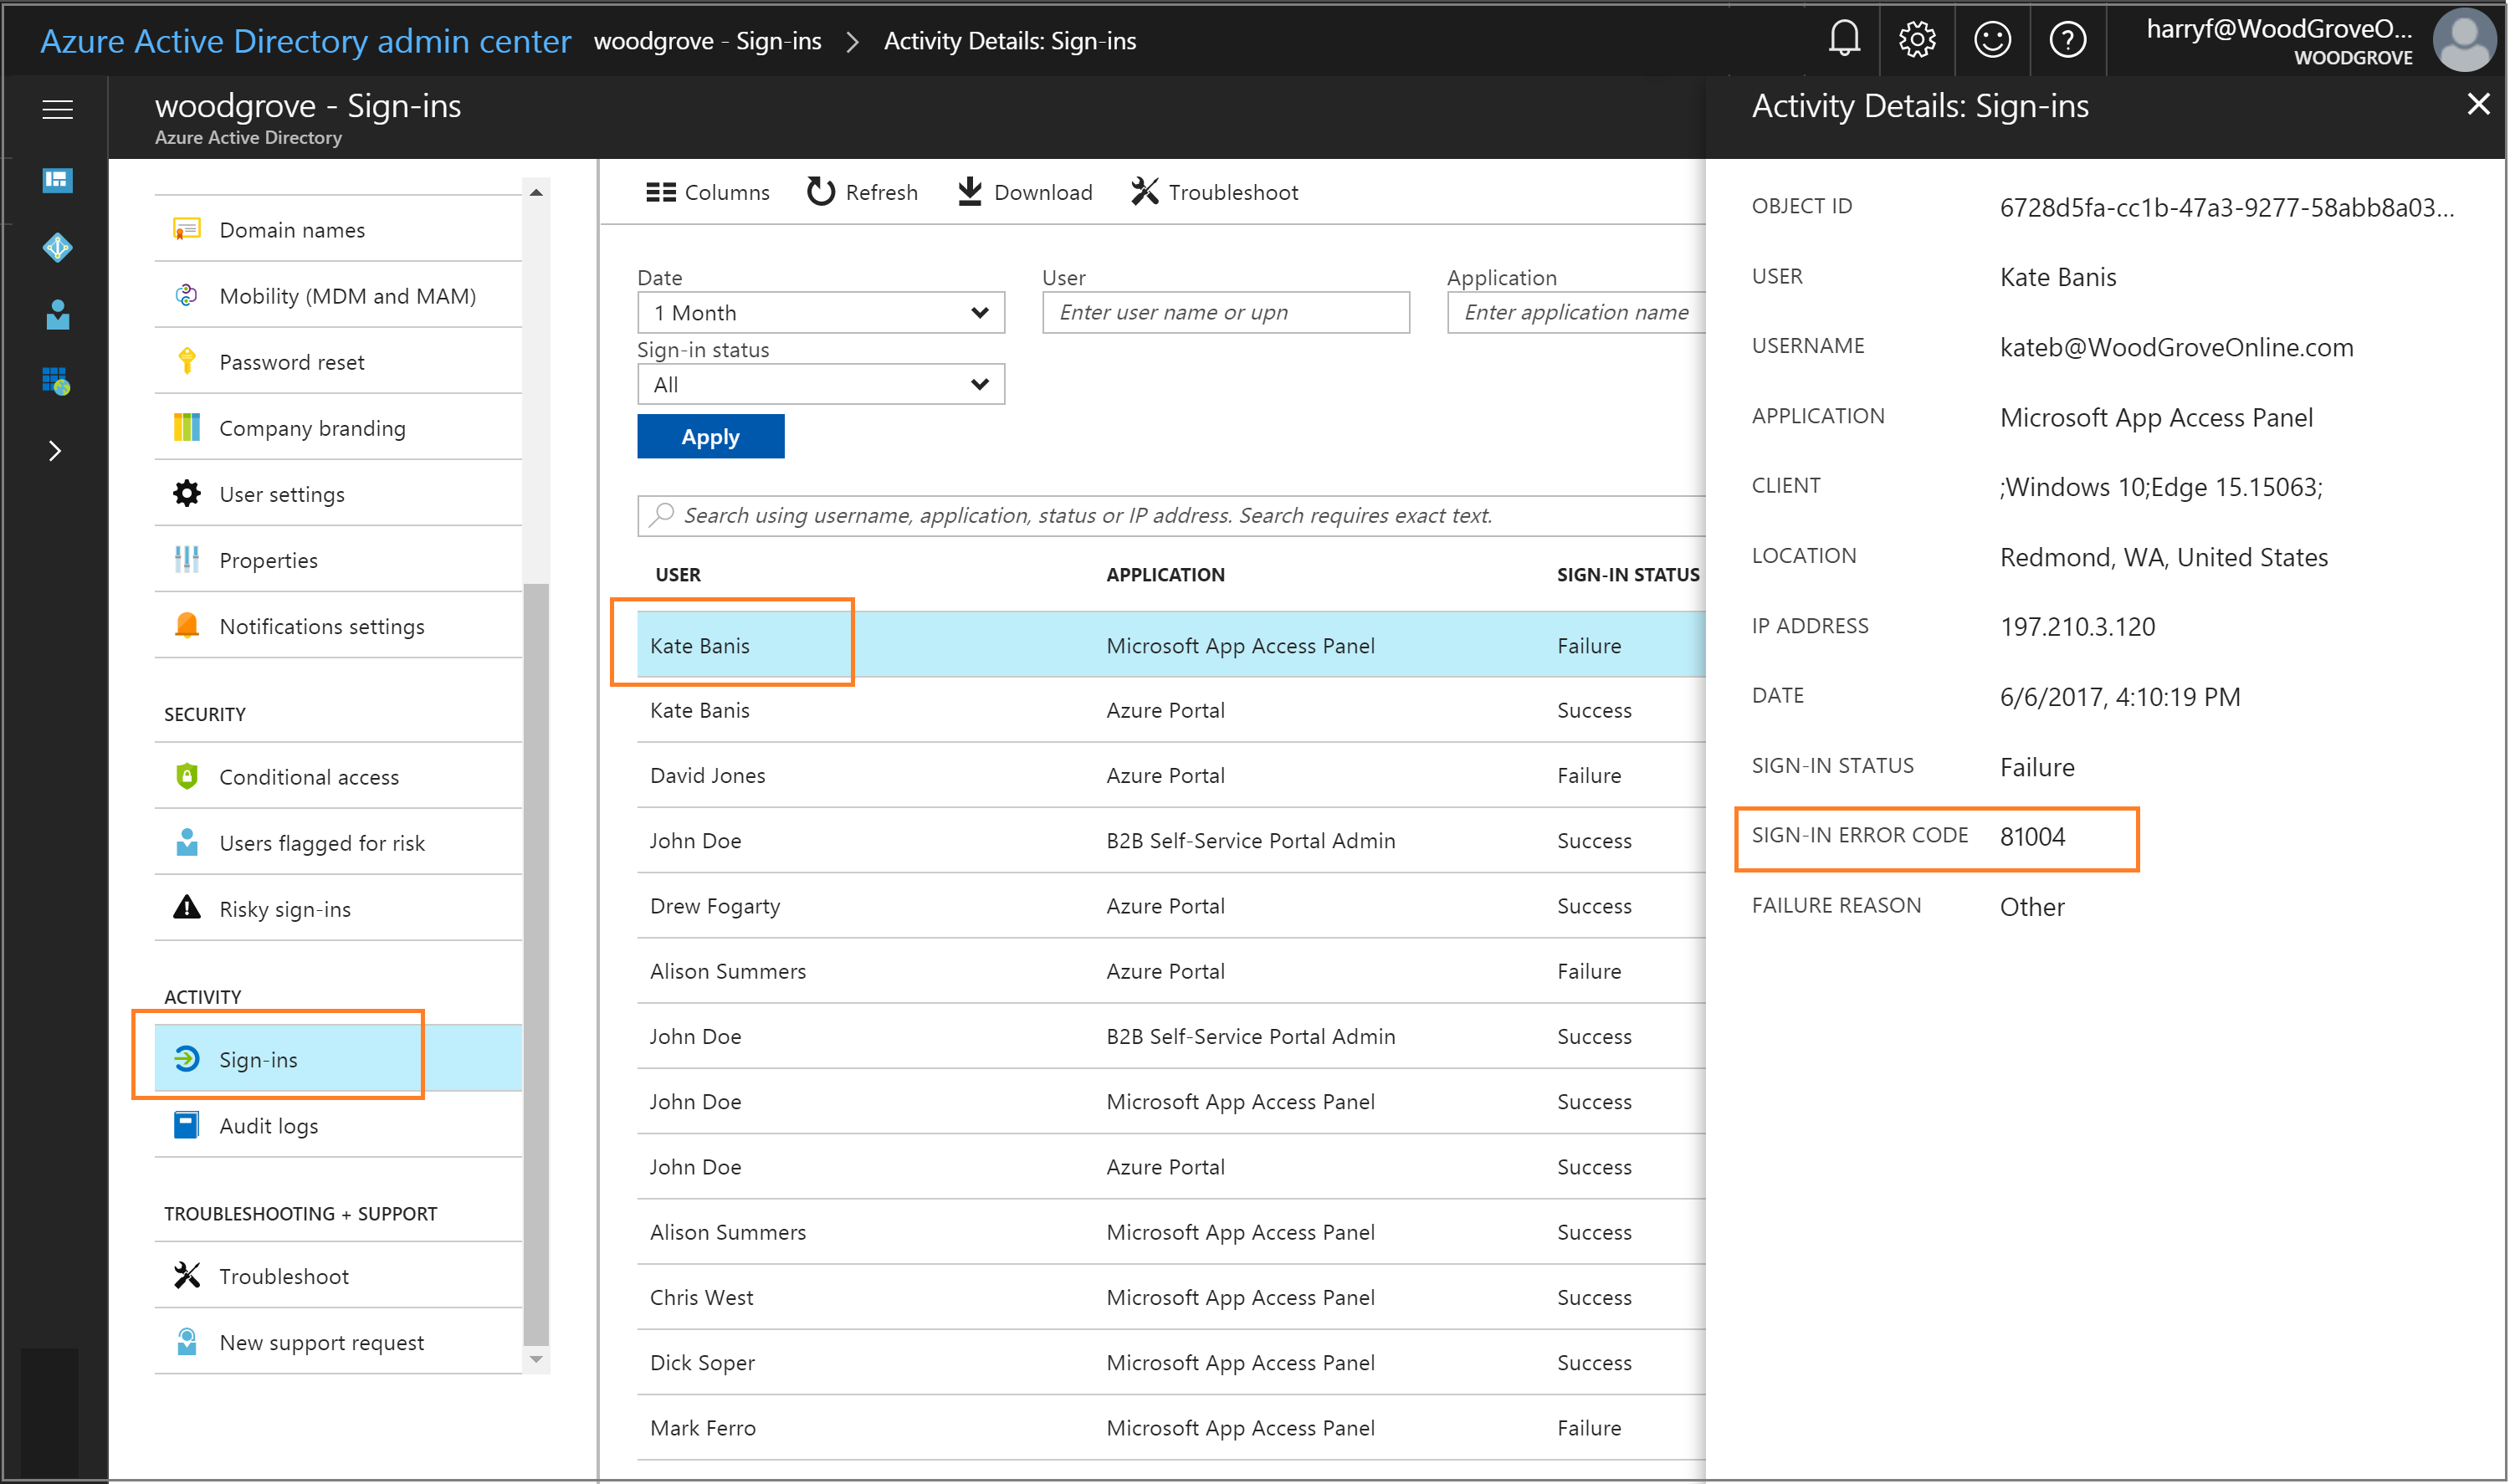 Azure Active Directory admin center: Sign-ins report